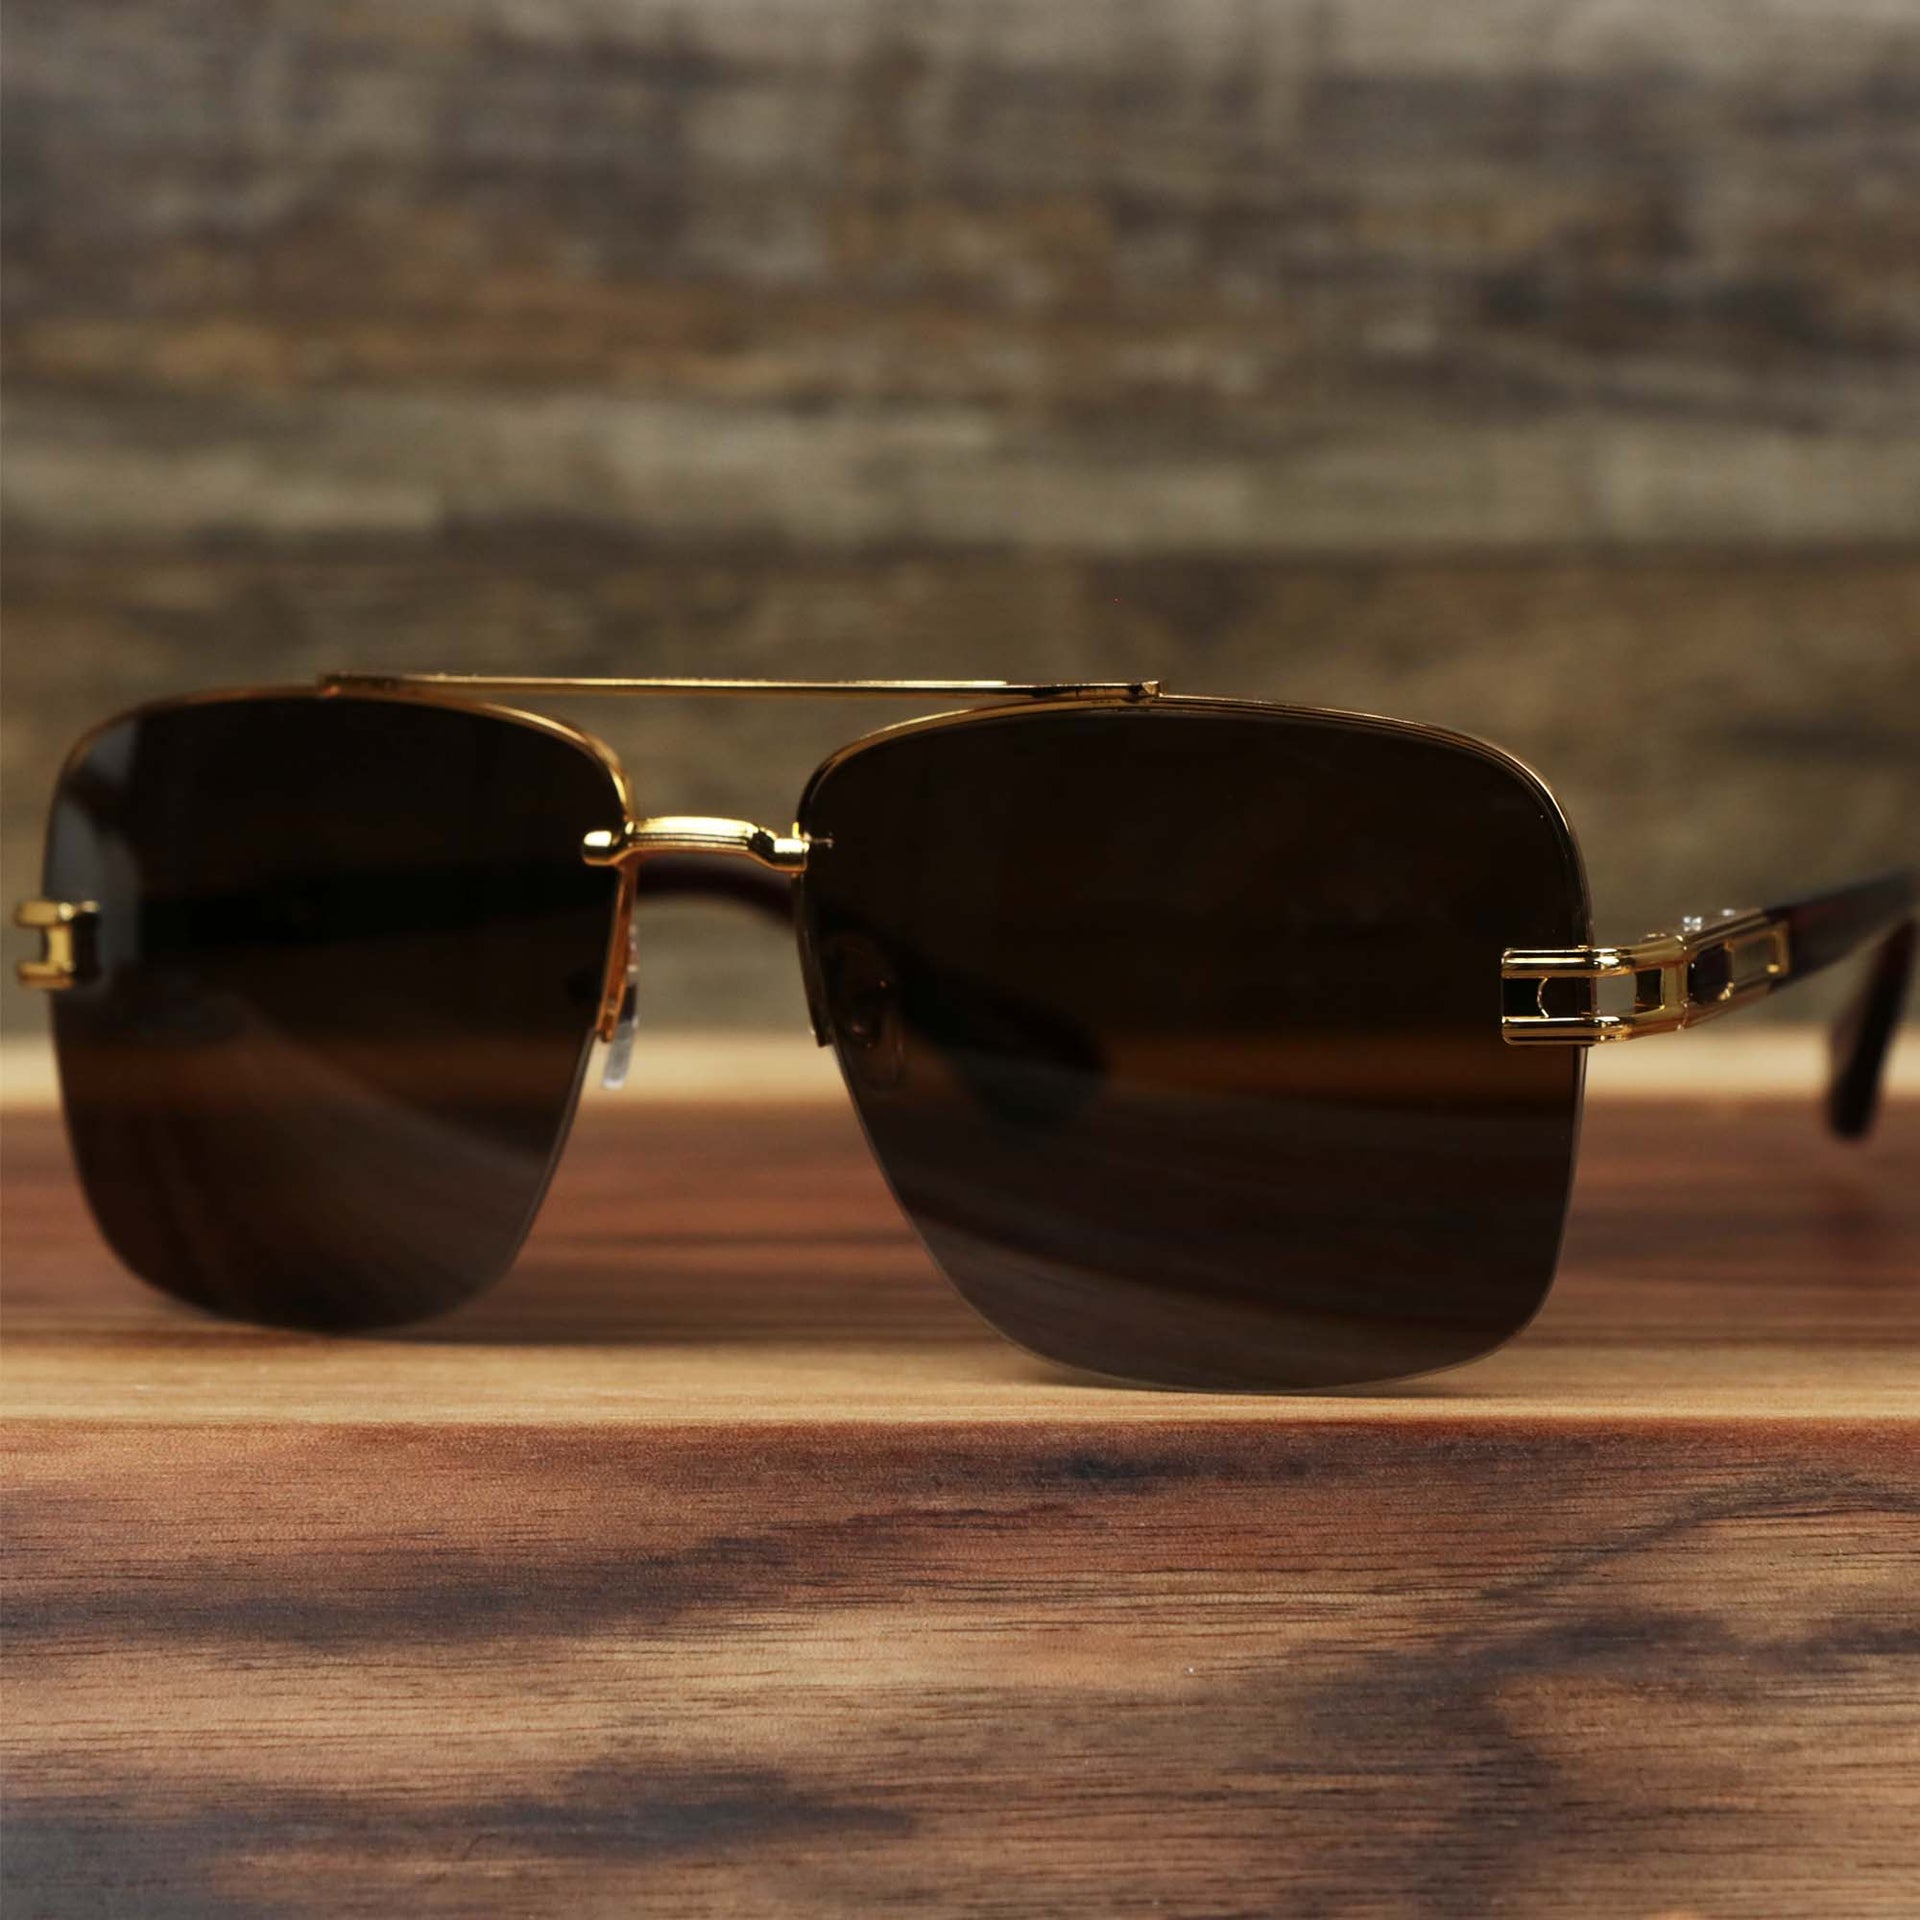 The Round Rectangle Frame Black Lens Sunglasses with Gold Frame